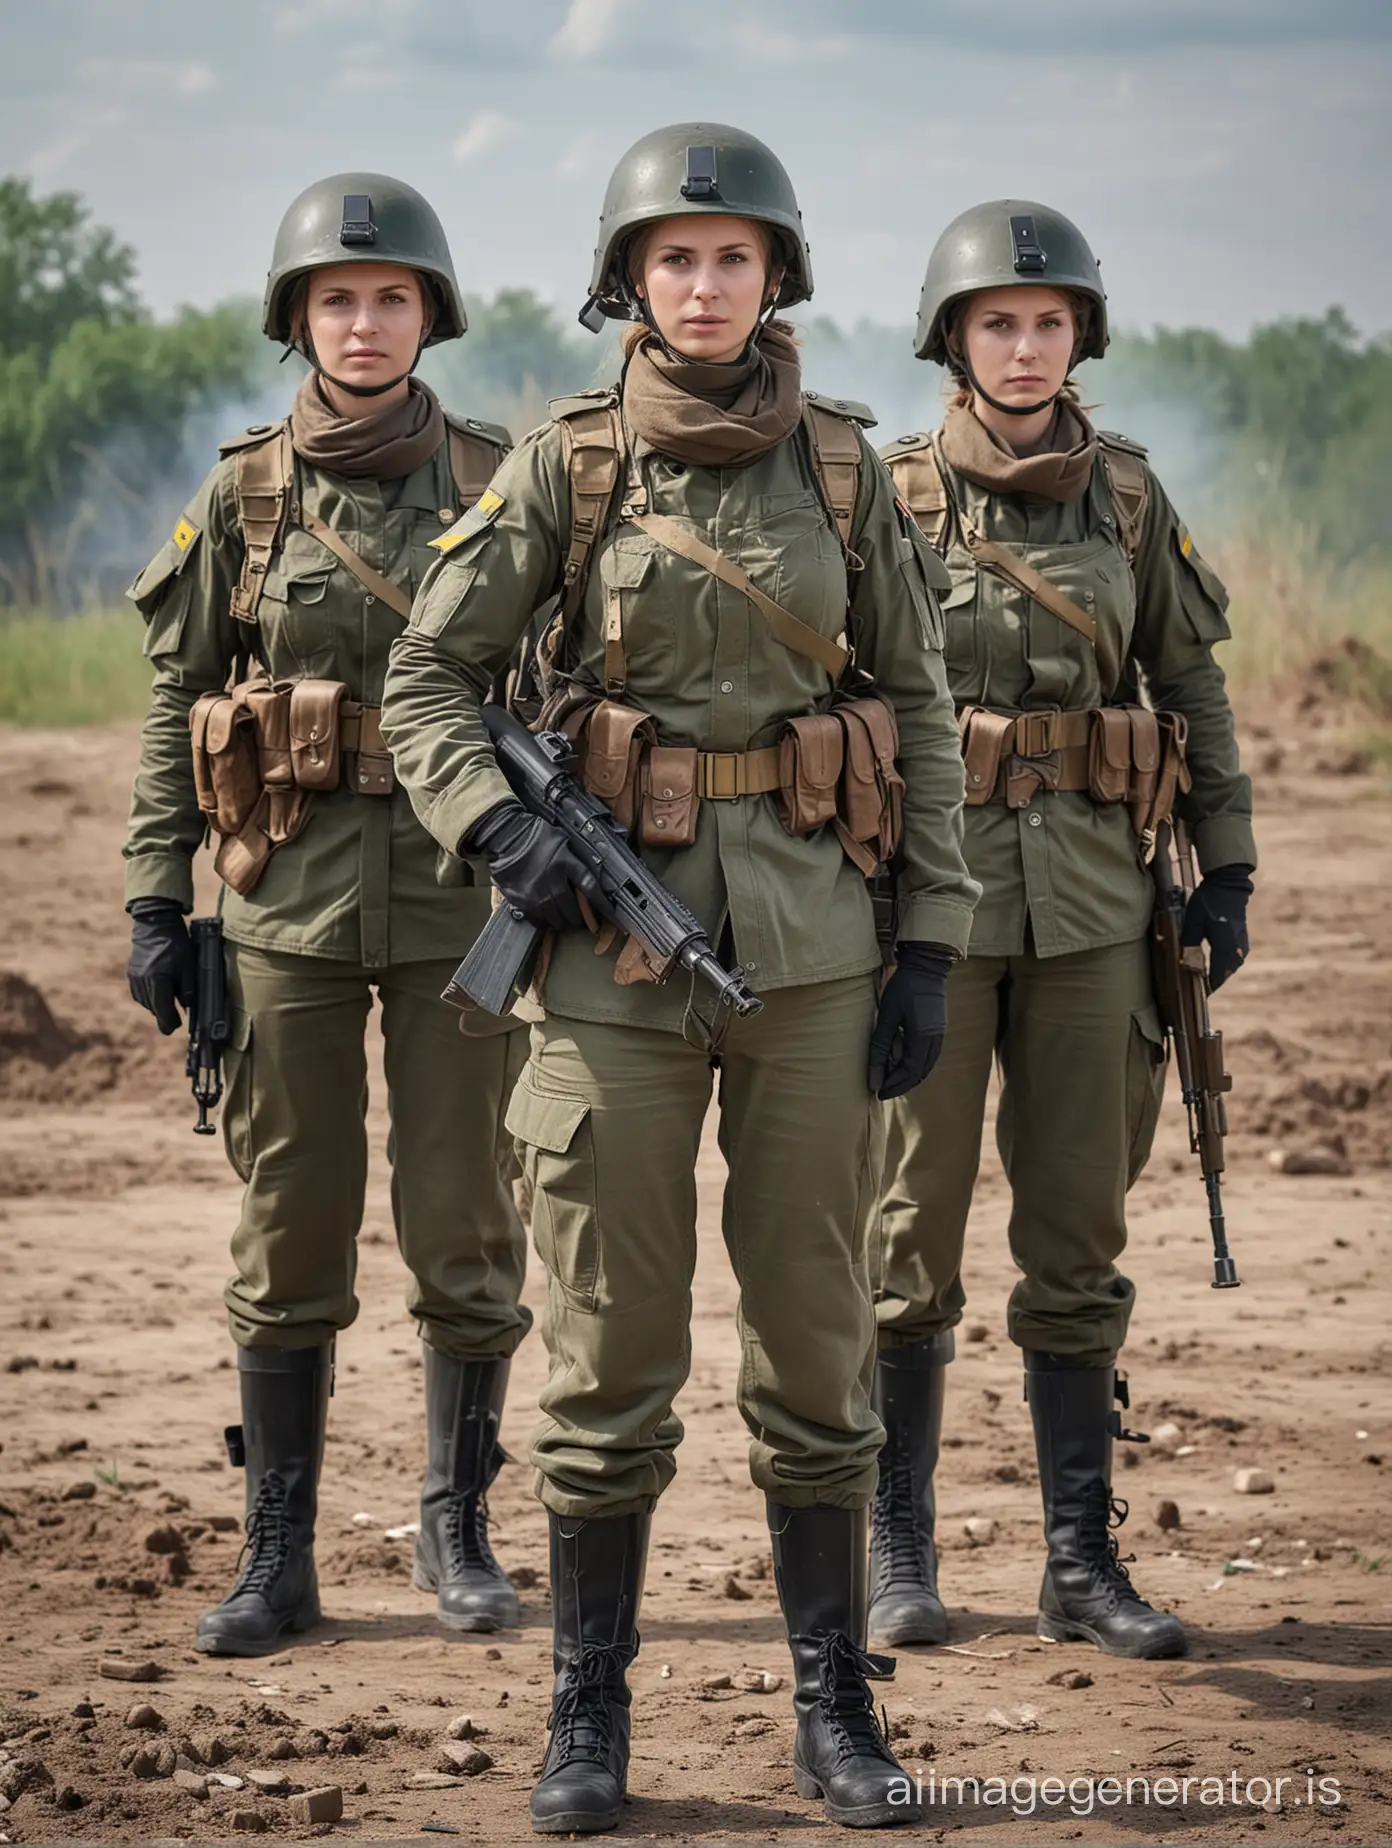 Ukrainian female soldiers on the battlefield, rocket launcher, protective helmets, 3 people, full-body frontal view, high definition